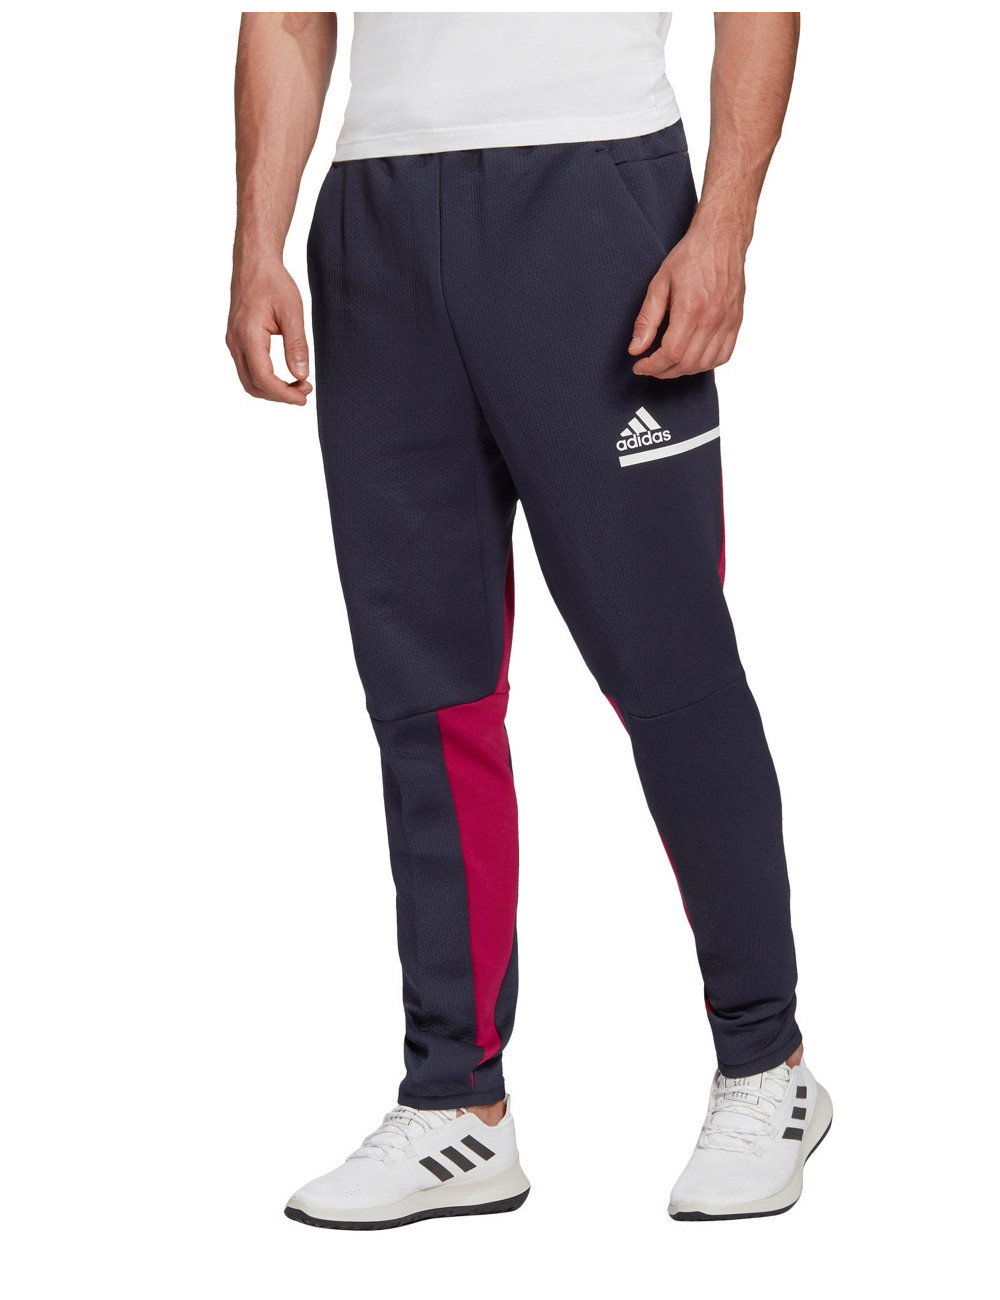 adidas Zne joggers in navy